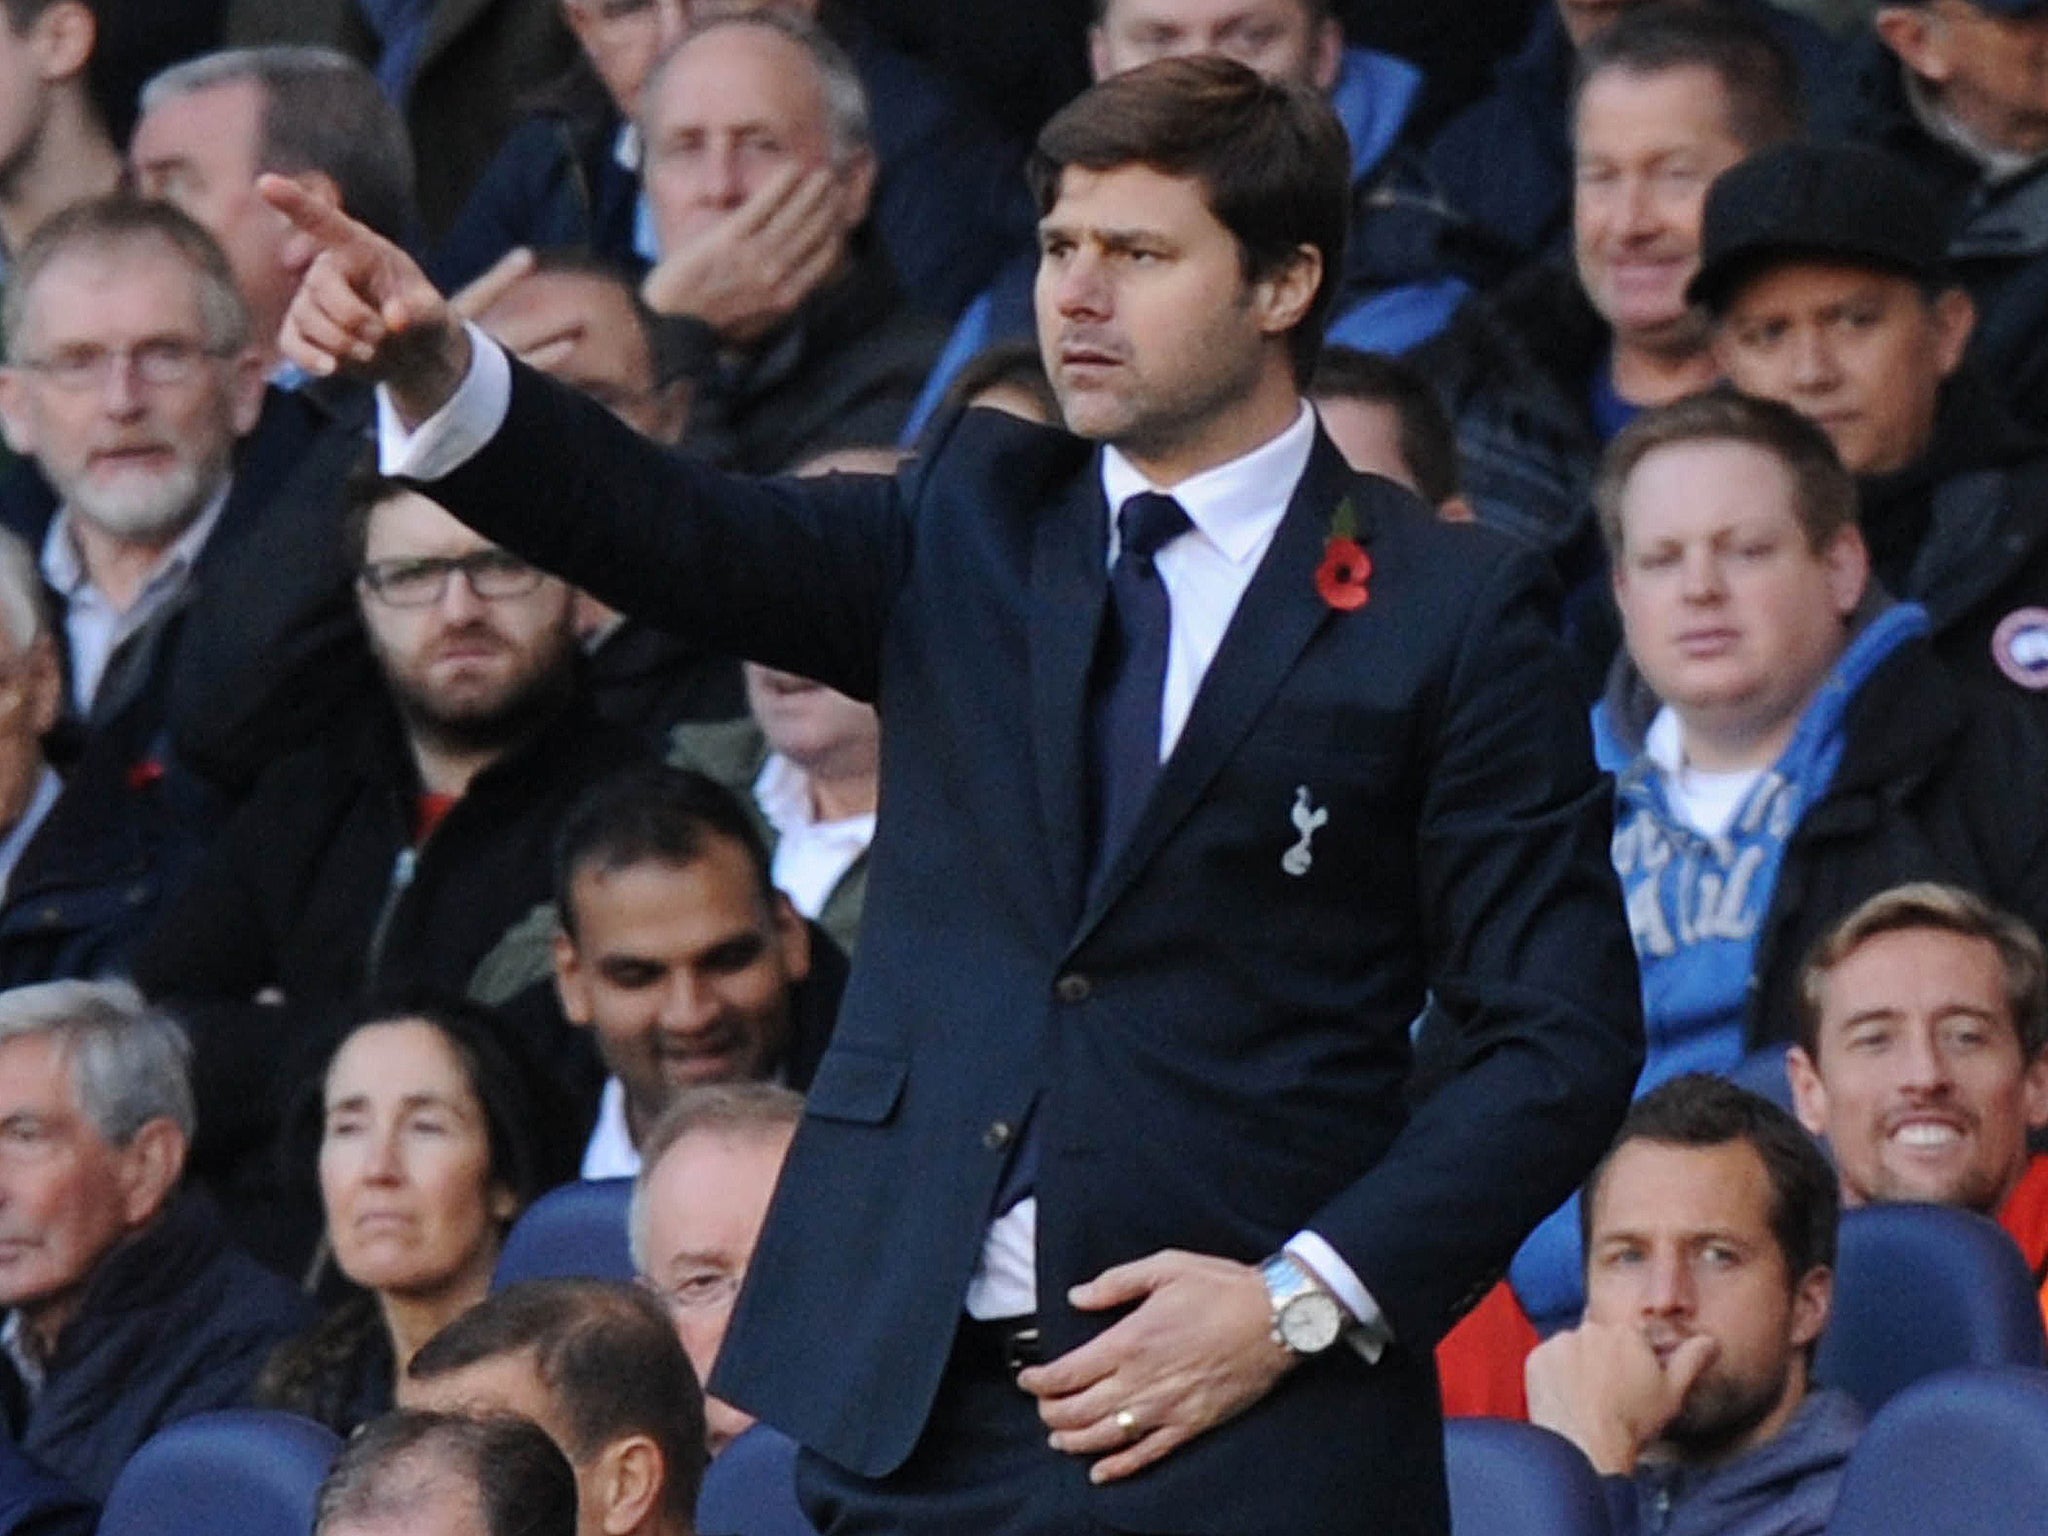 Tottenham Hotspurs manager Mauricio Pochettino gestures from his technical area during the Premier League football match against Stoke